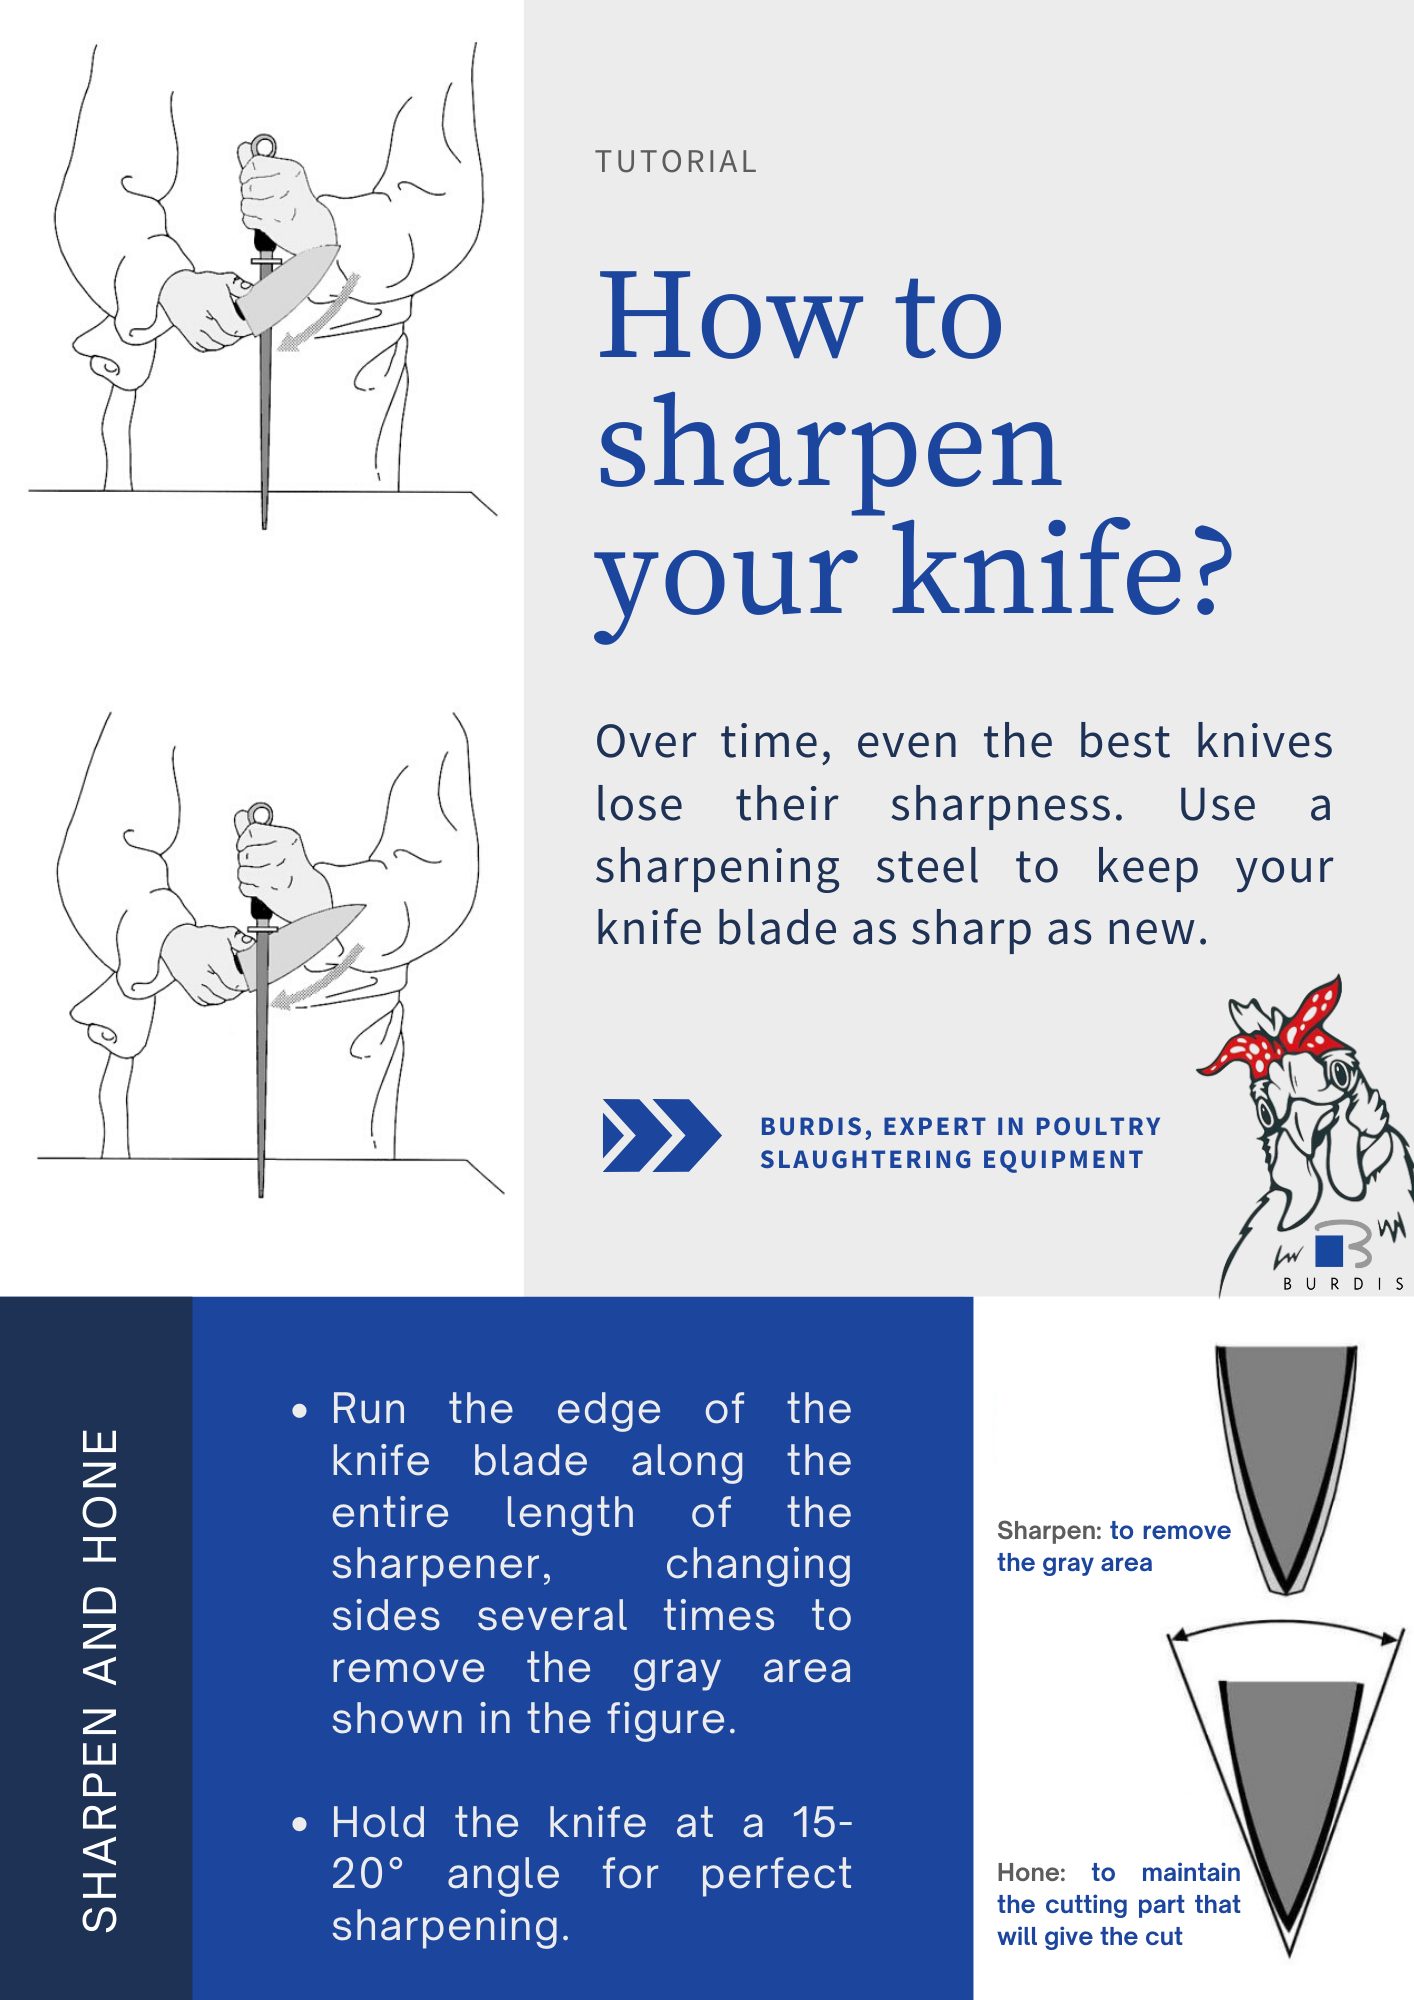 How to sharpen your knife with a steel